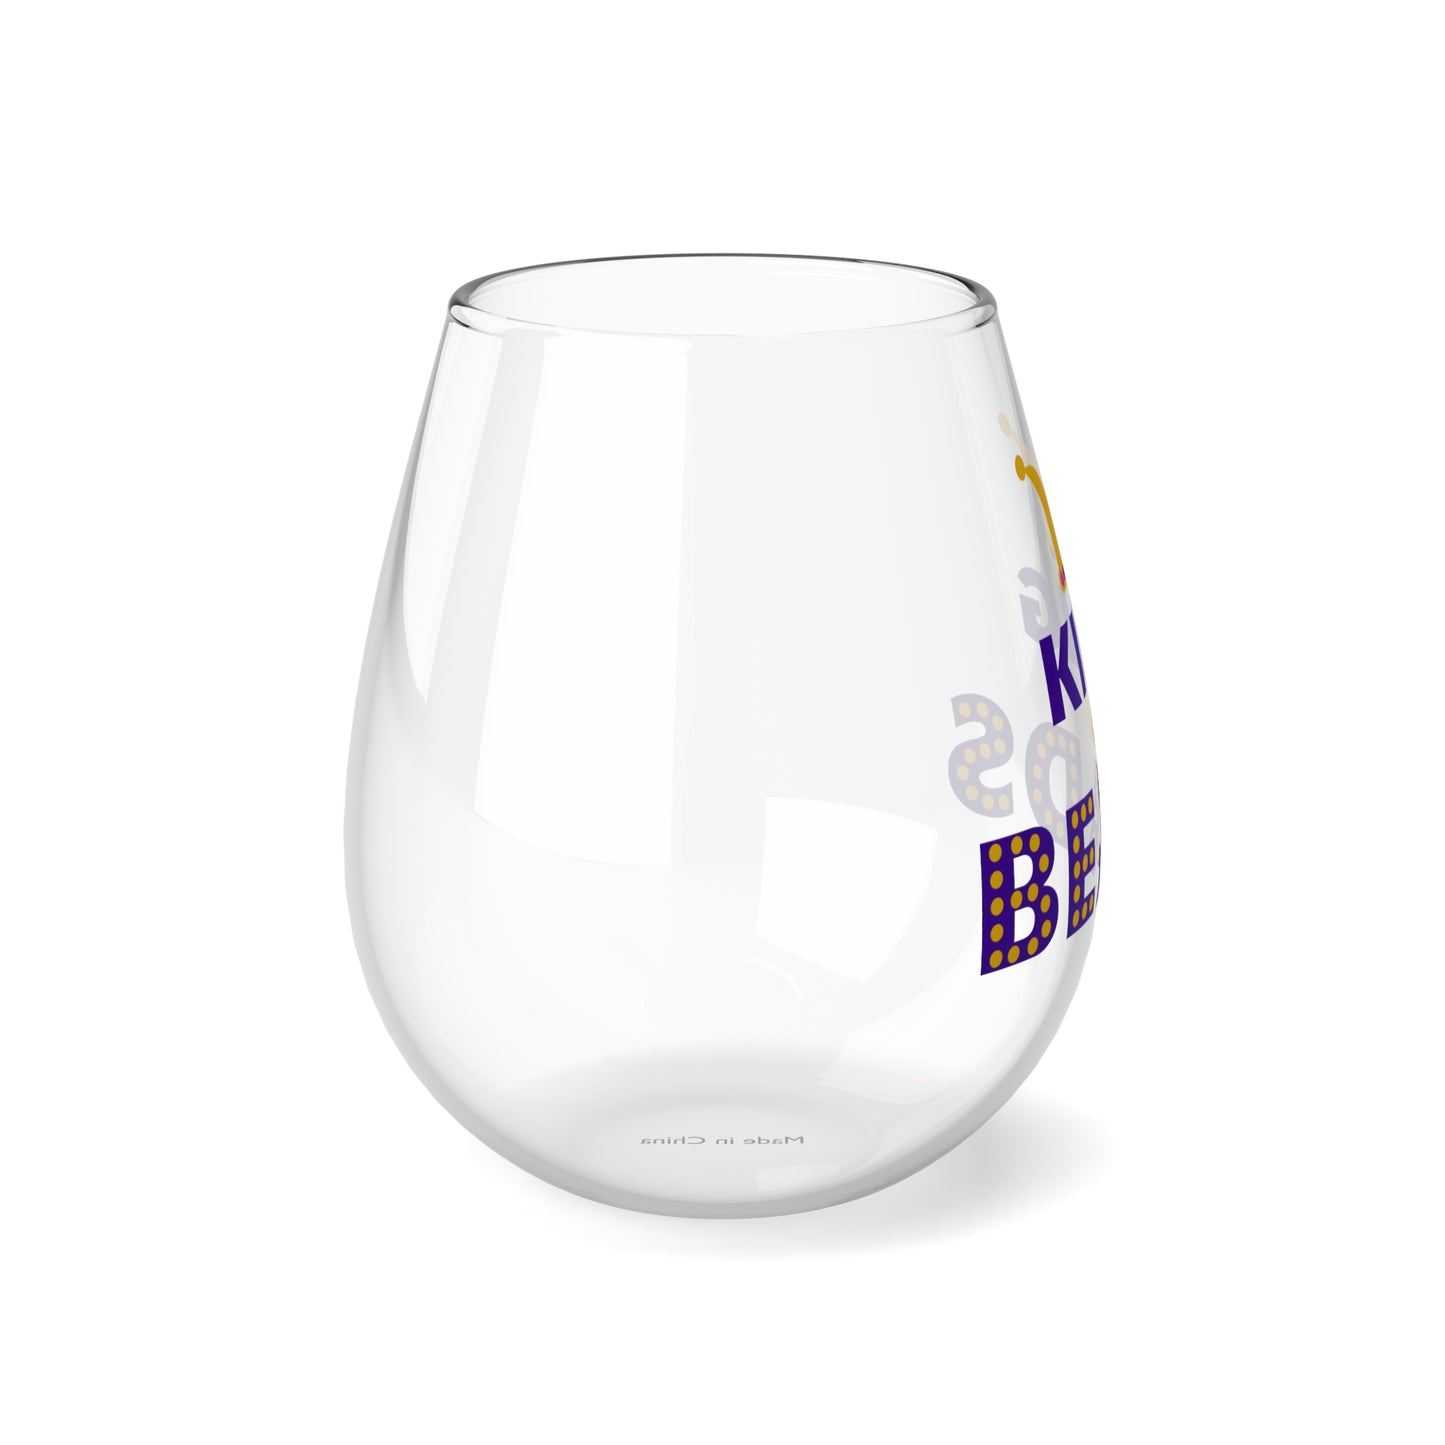 King of Beads Stemless Wine Glass, 11.75oz